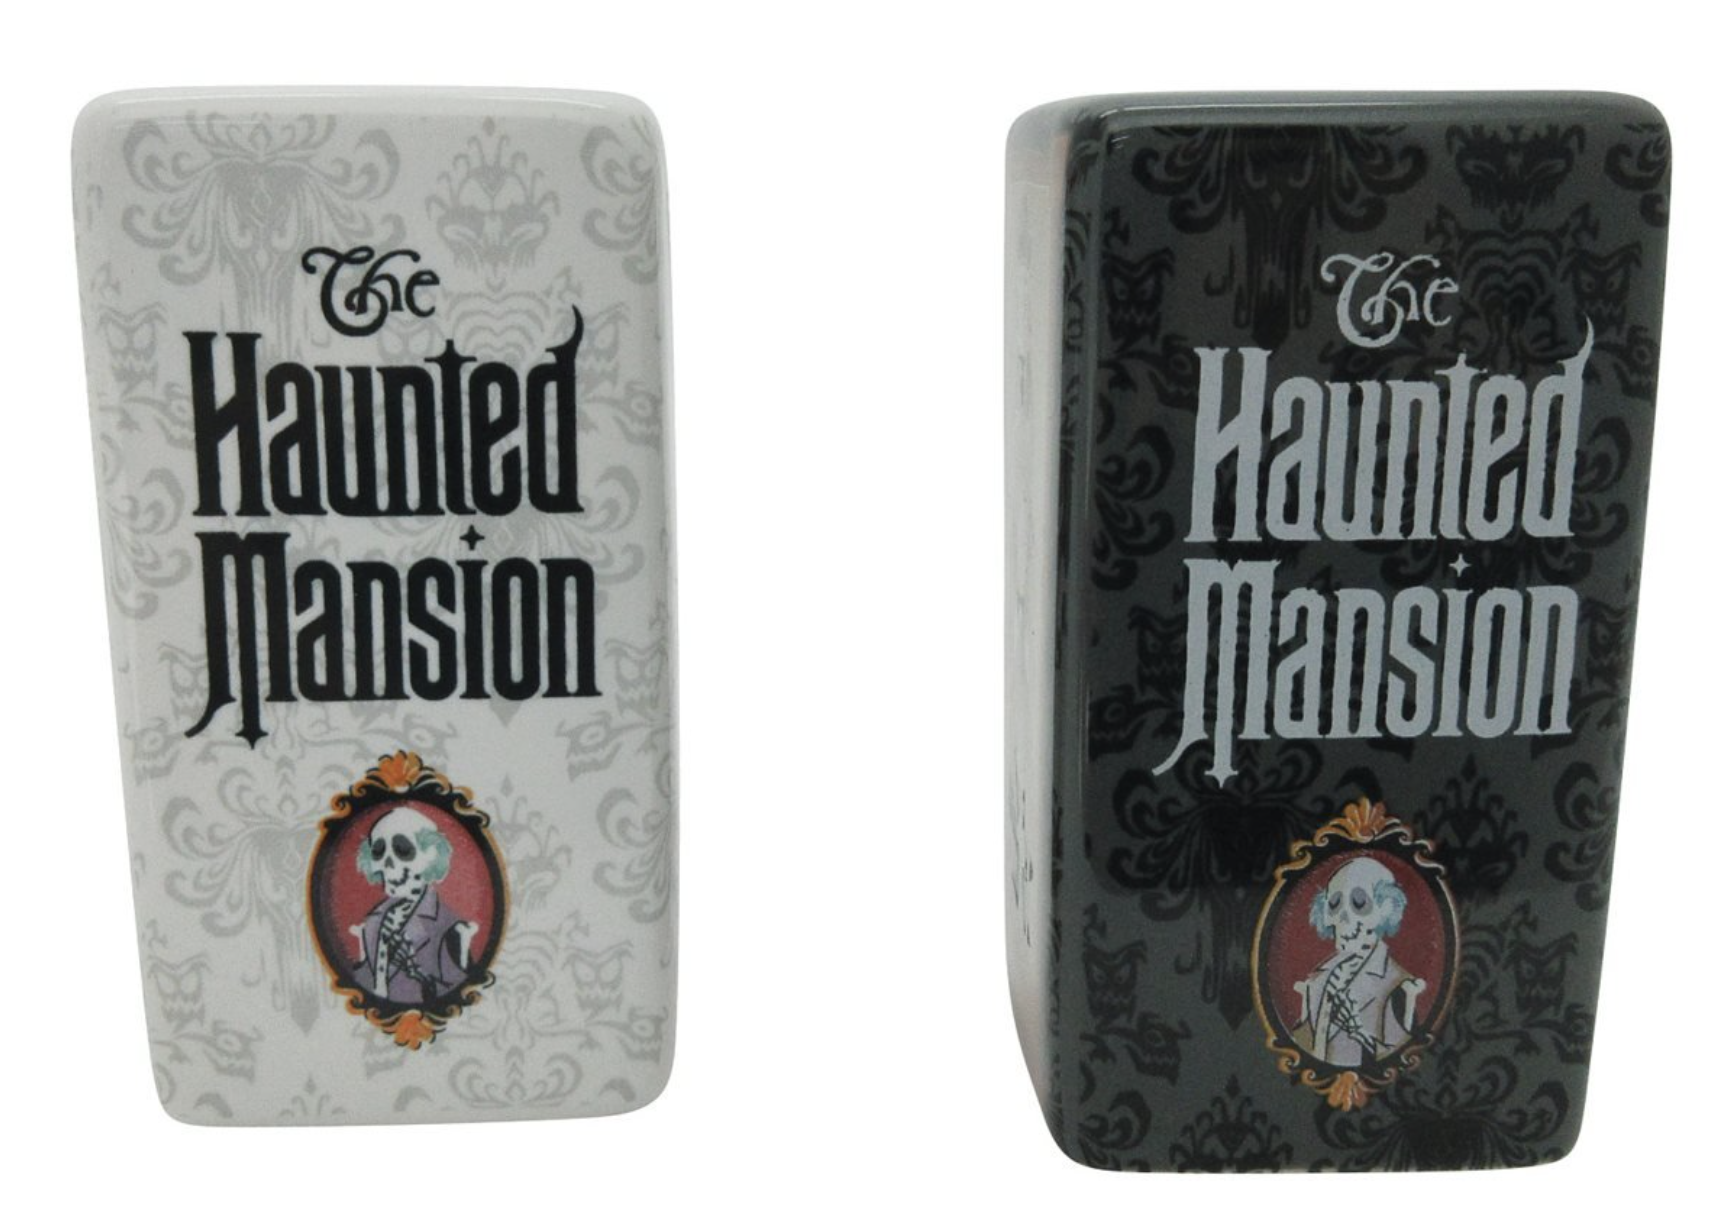 https://www.disneyfoodblog.com/wp-content/uploads/2021/06/2021-entertainment-earth-haunted-mansion-salt-and-pepper-shakers.png